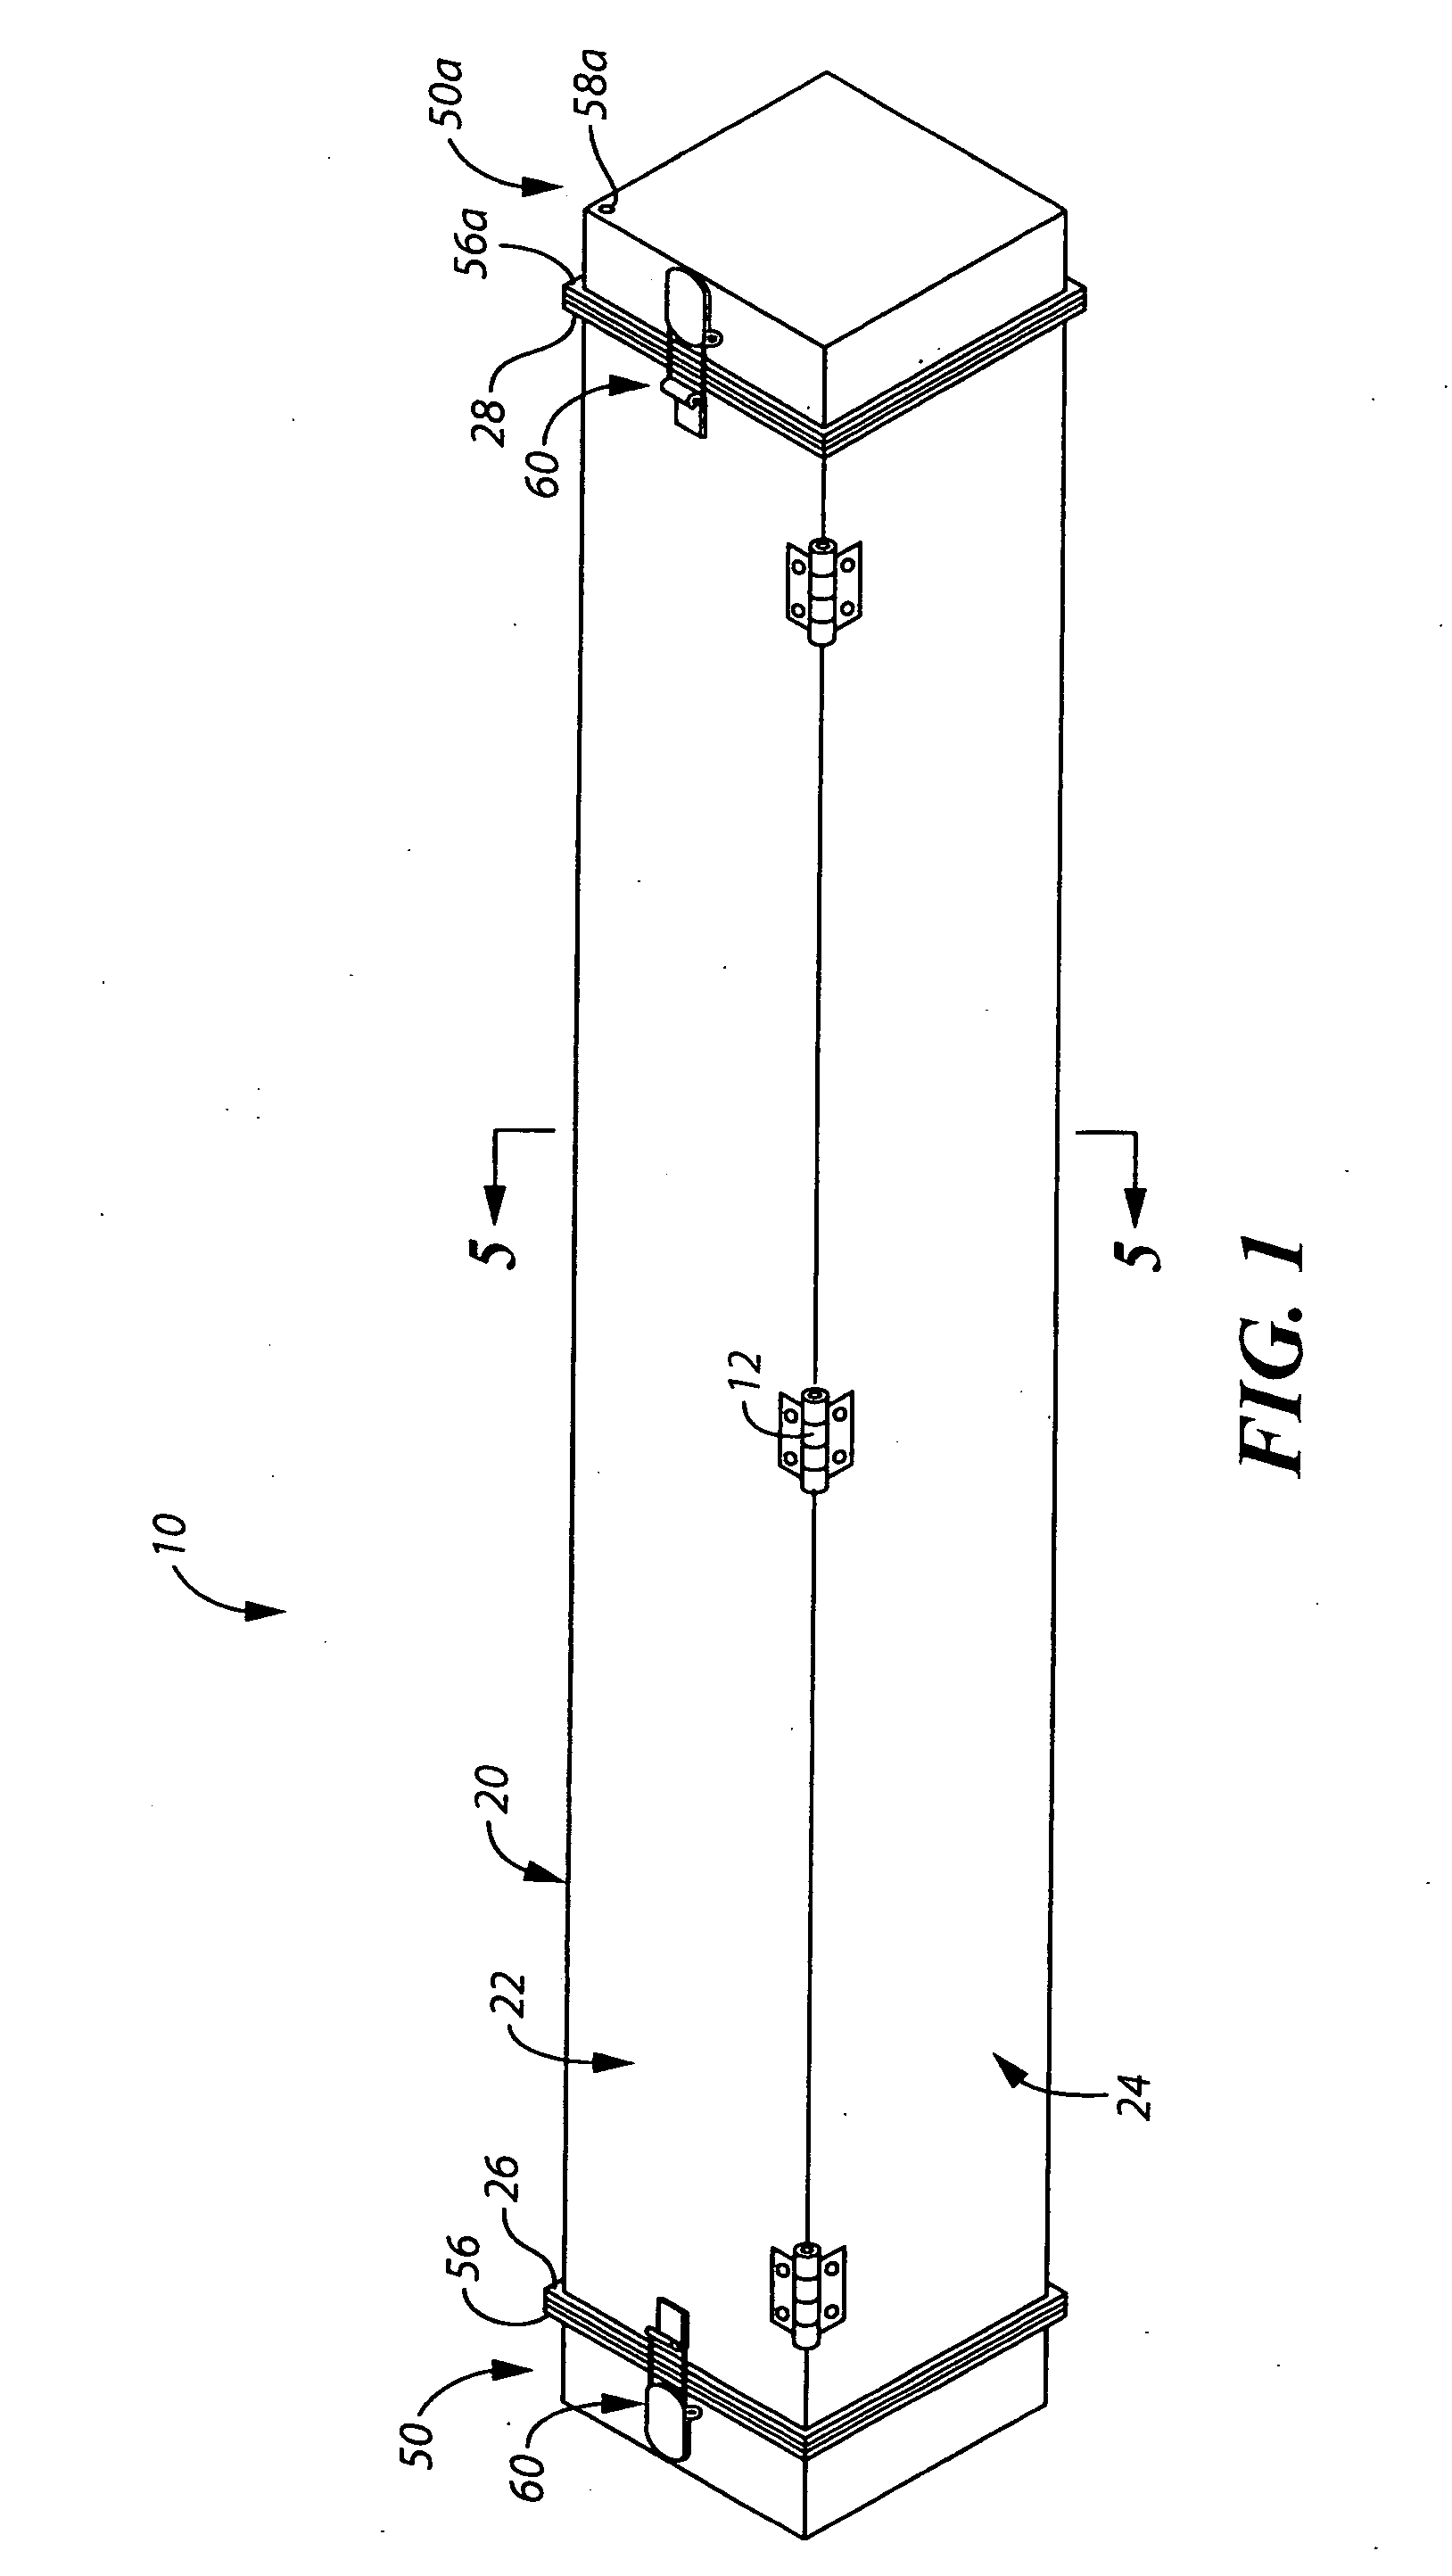 Structural building component having a decorative overmolding, apparatus for fabricating such an article and its method of manufacture